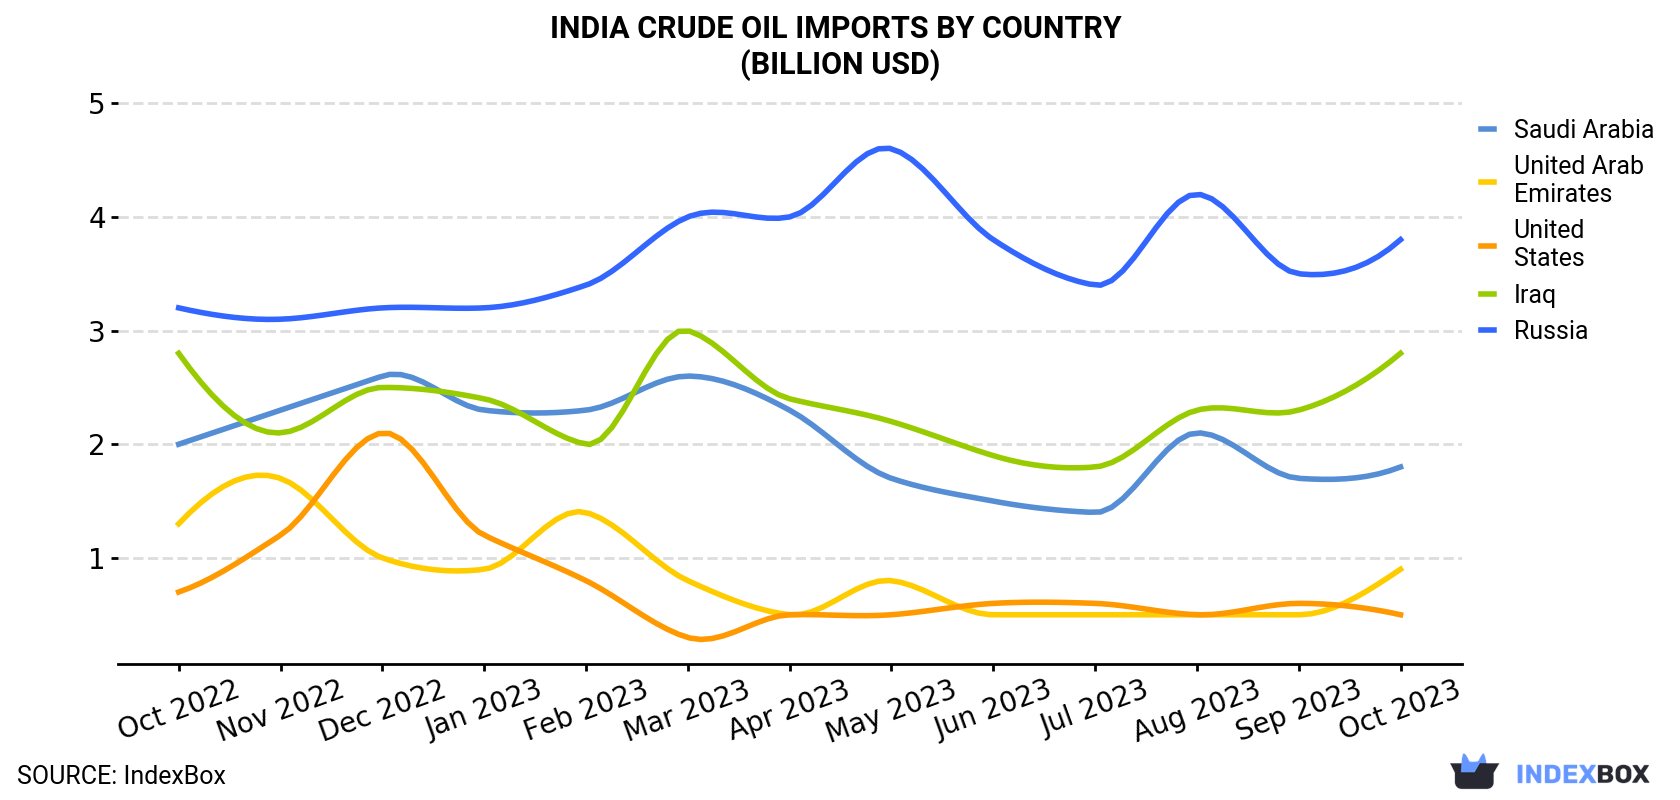 India Crude Oil Imports By Country (Billion USD)